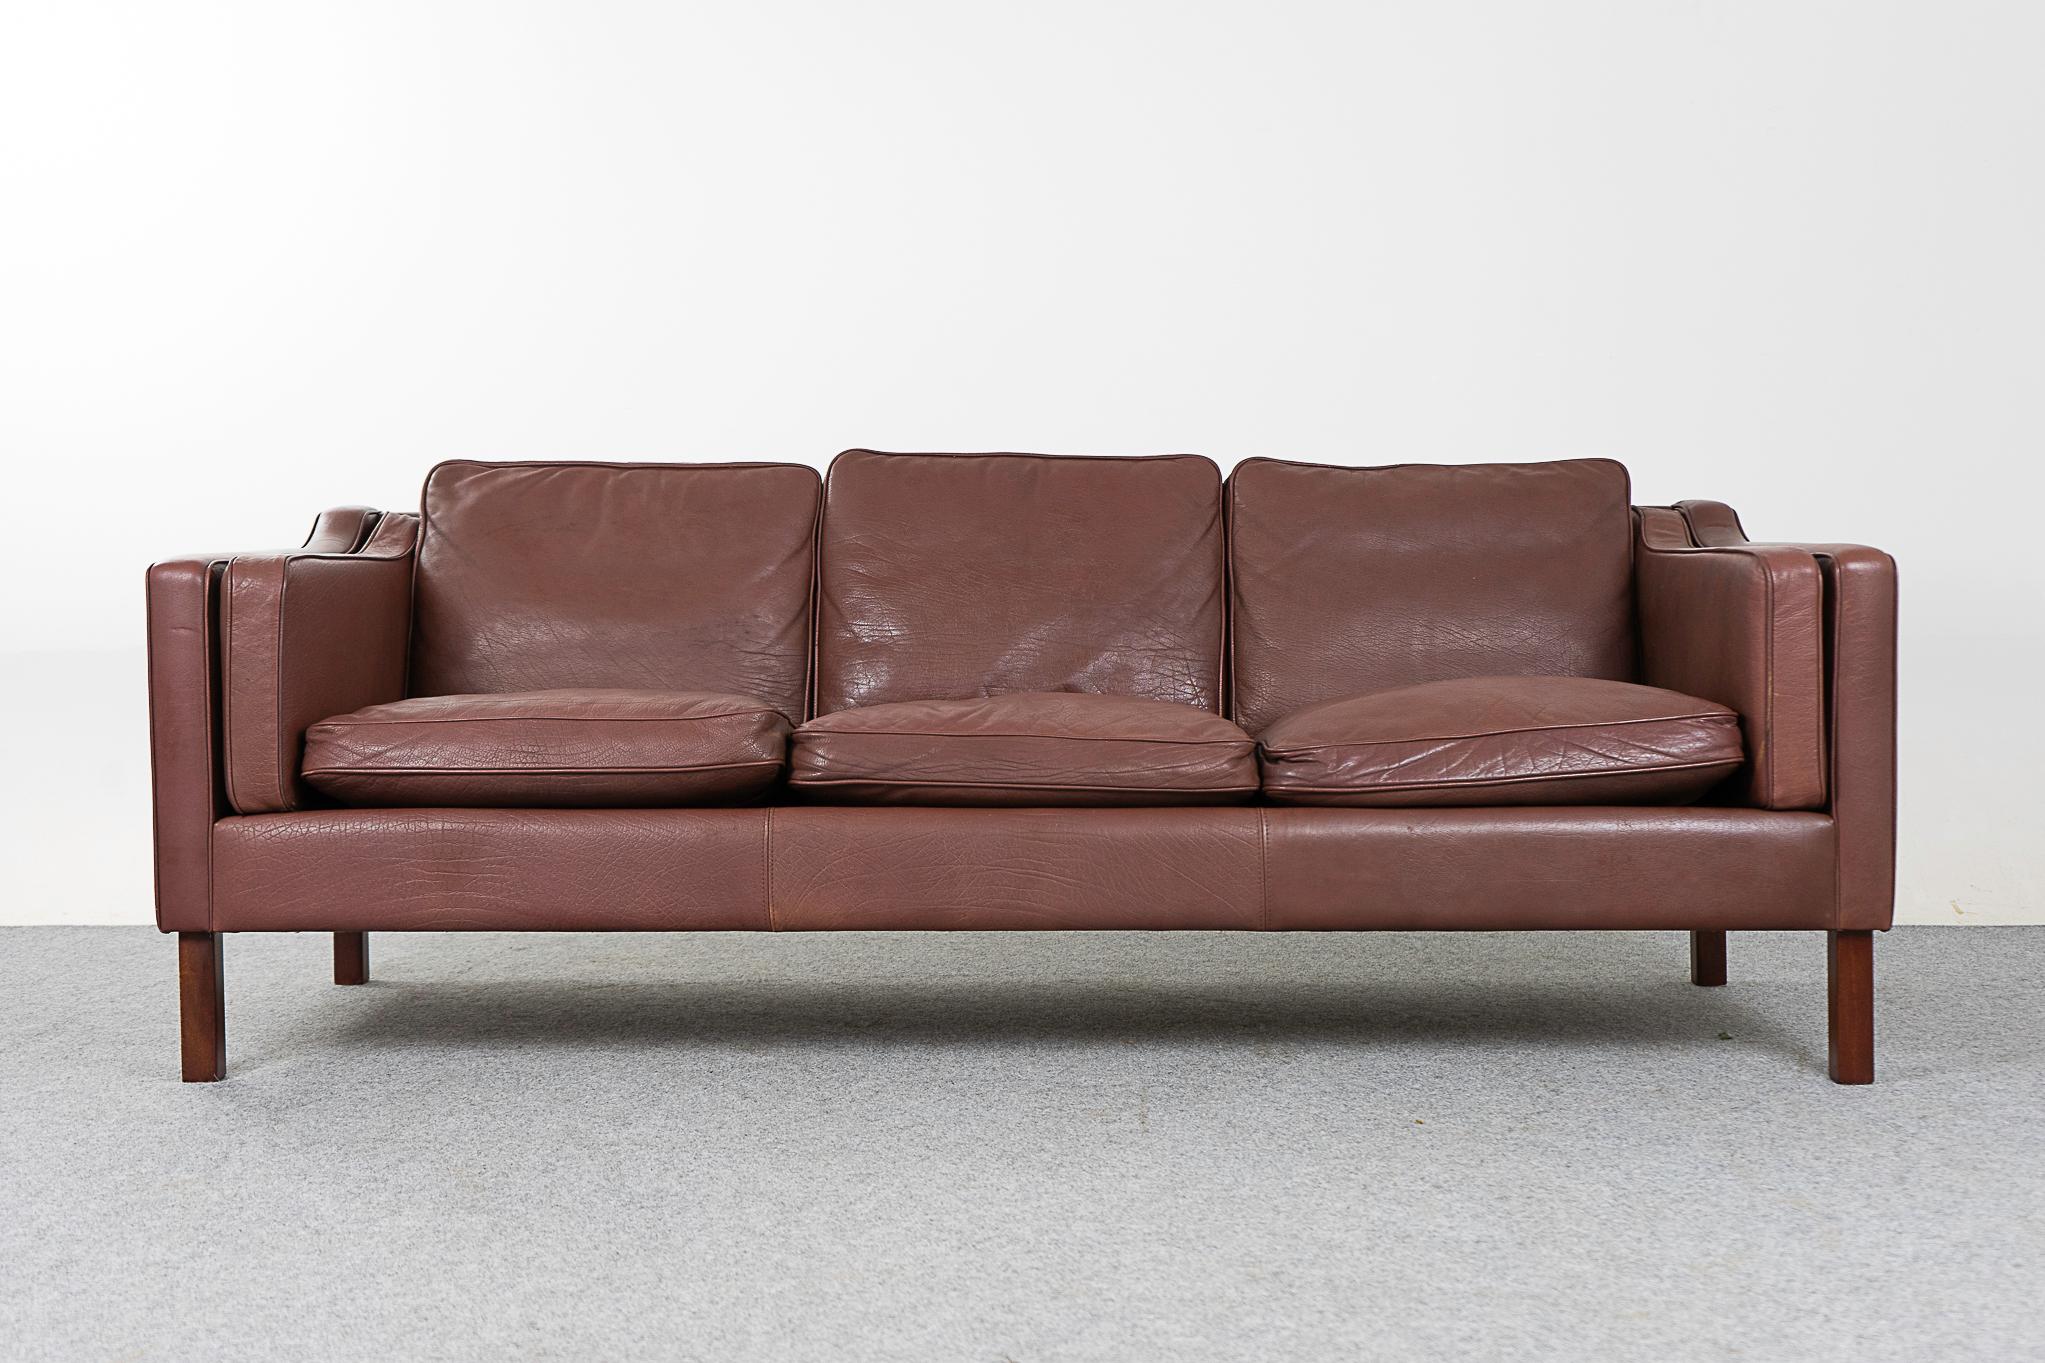 Leather Danish sofa, circa 1960's. Original brown leather is soft and supple while also being durable to ensure years of use and enjoyment. Clean modern design that works well with any decor.

Please inquire for remote and international shipping